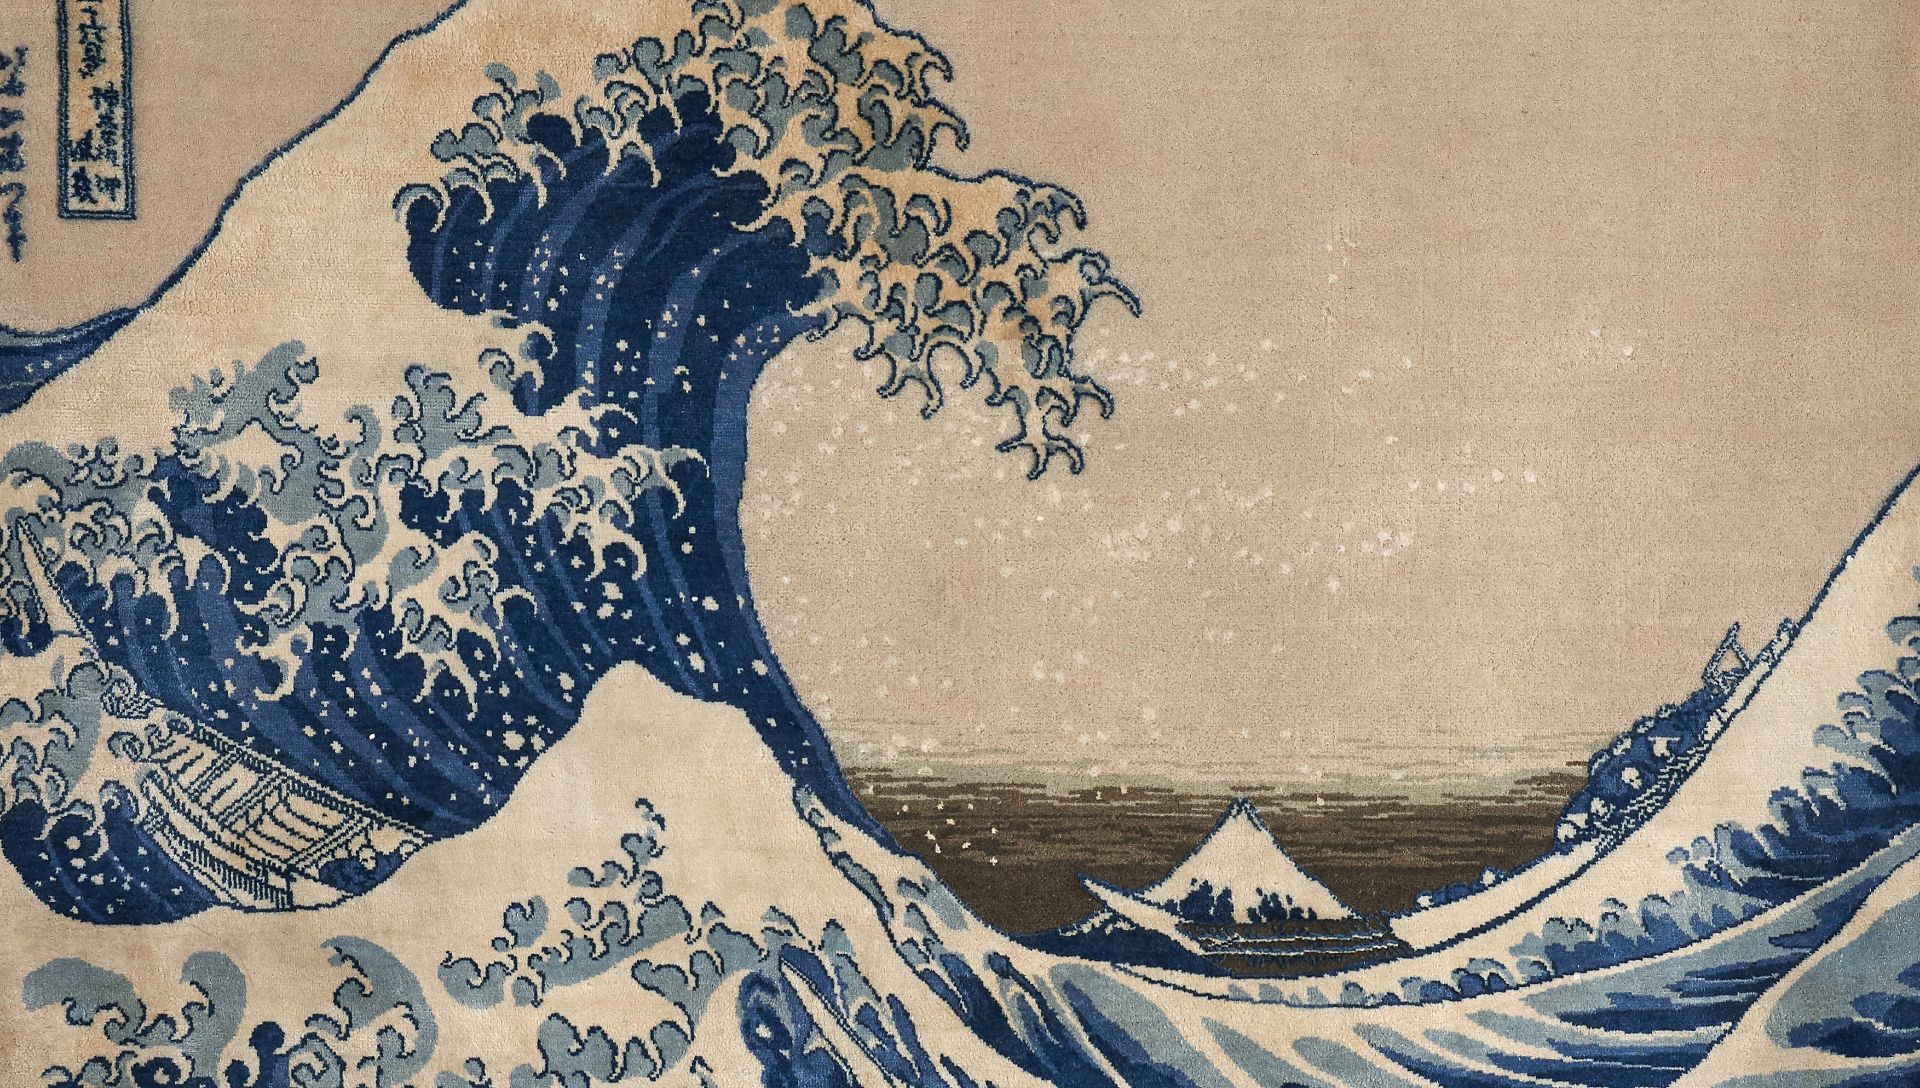 Wave off Kanagawa (also known as “The Great Wave”)